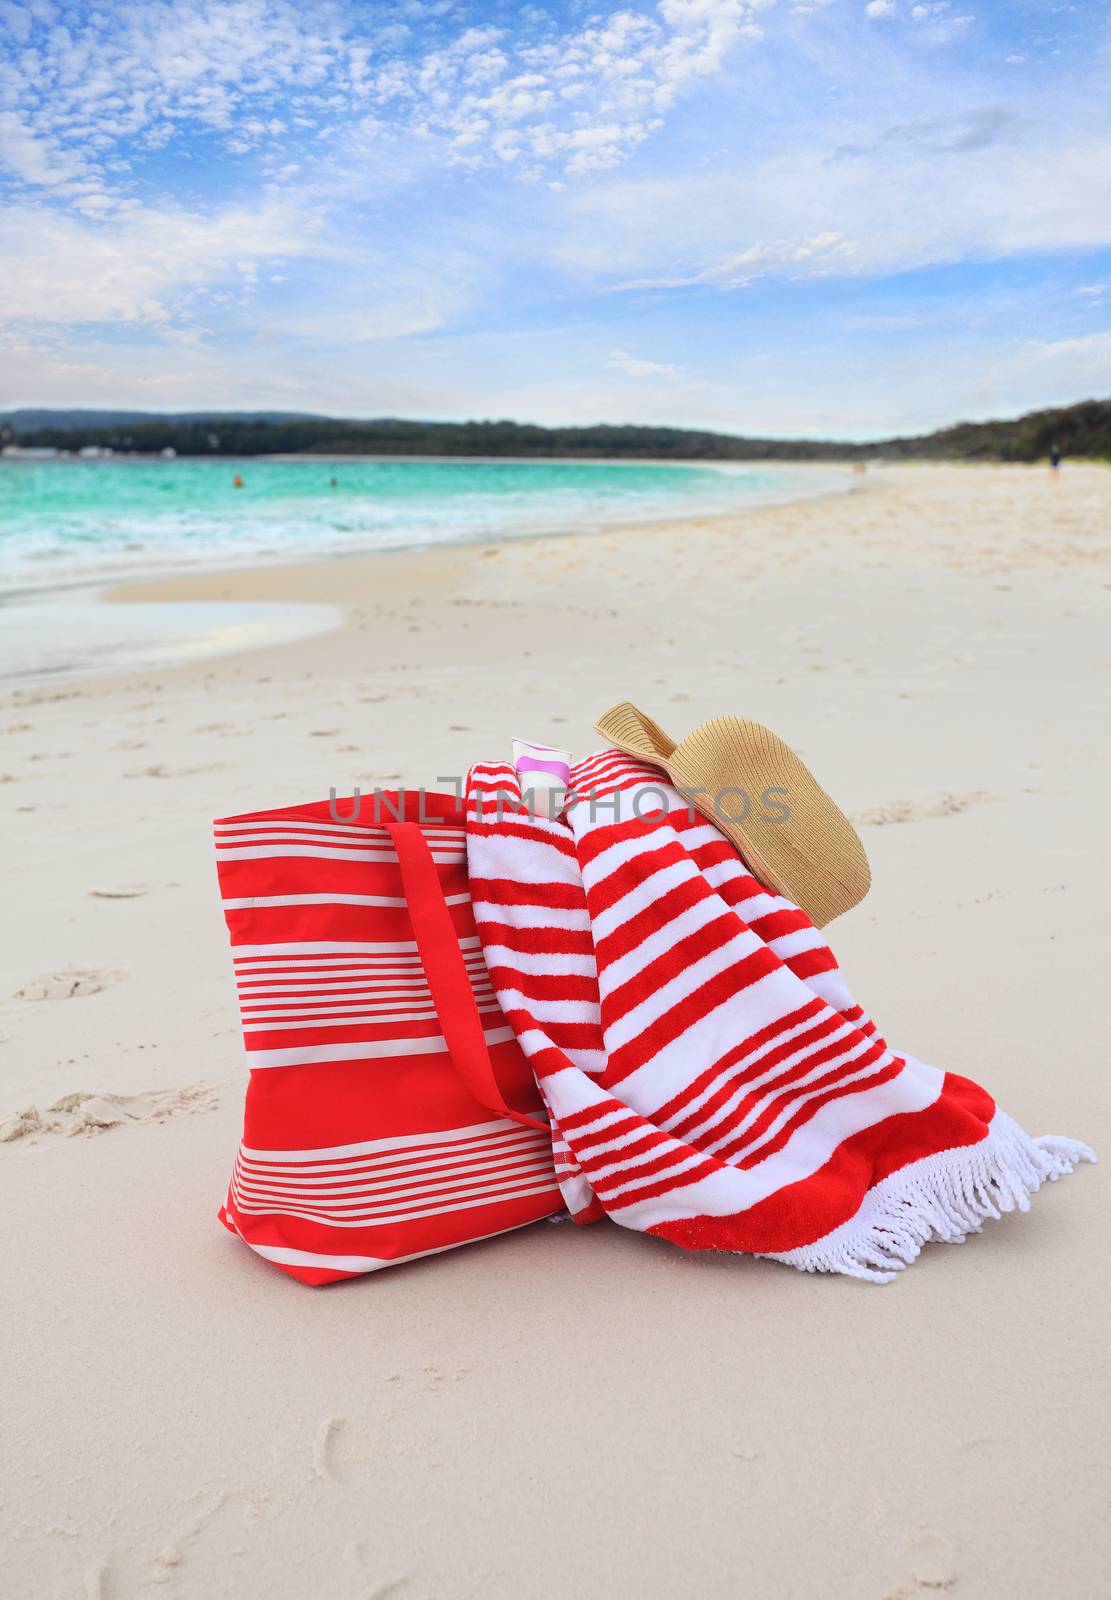 Beach bag towel and hat on the sand by lovleah